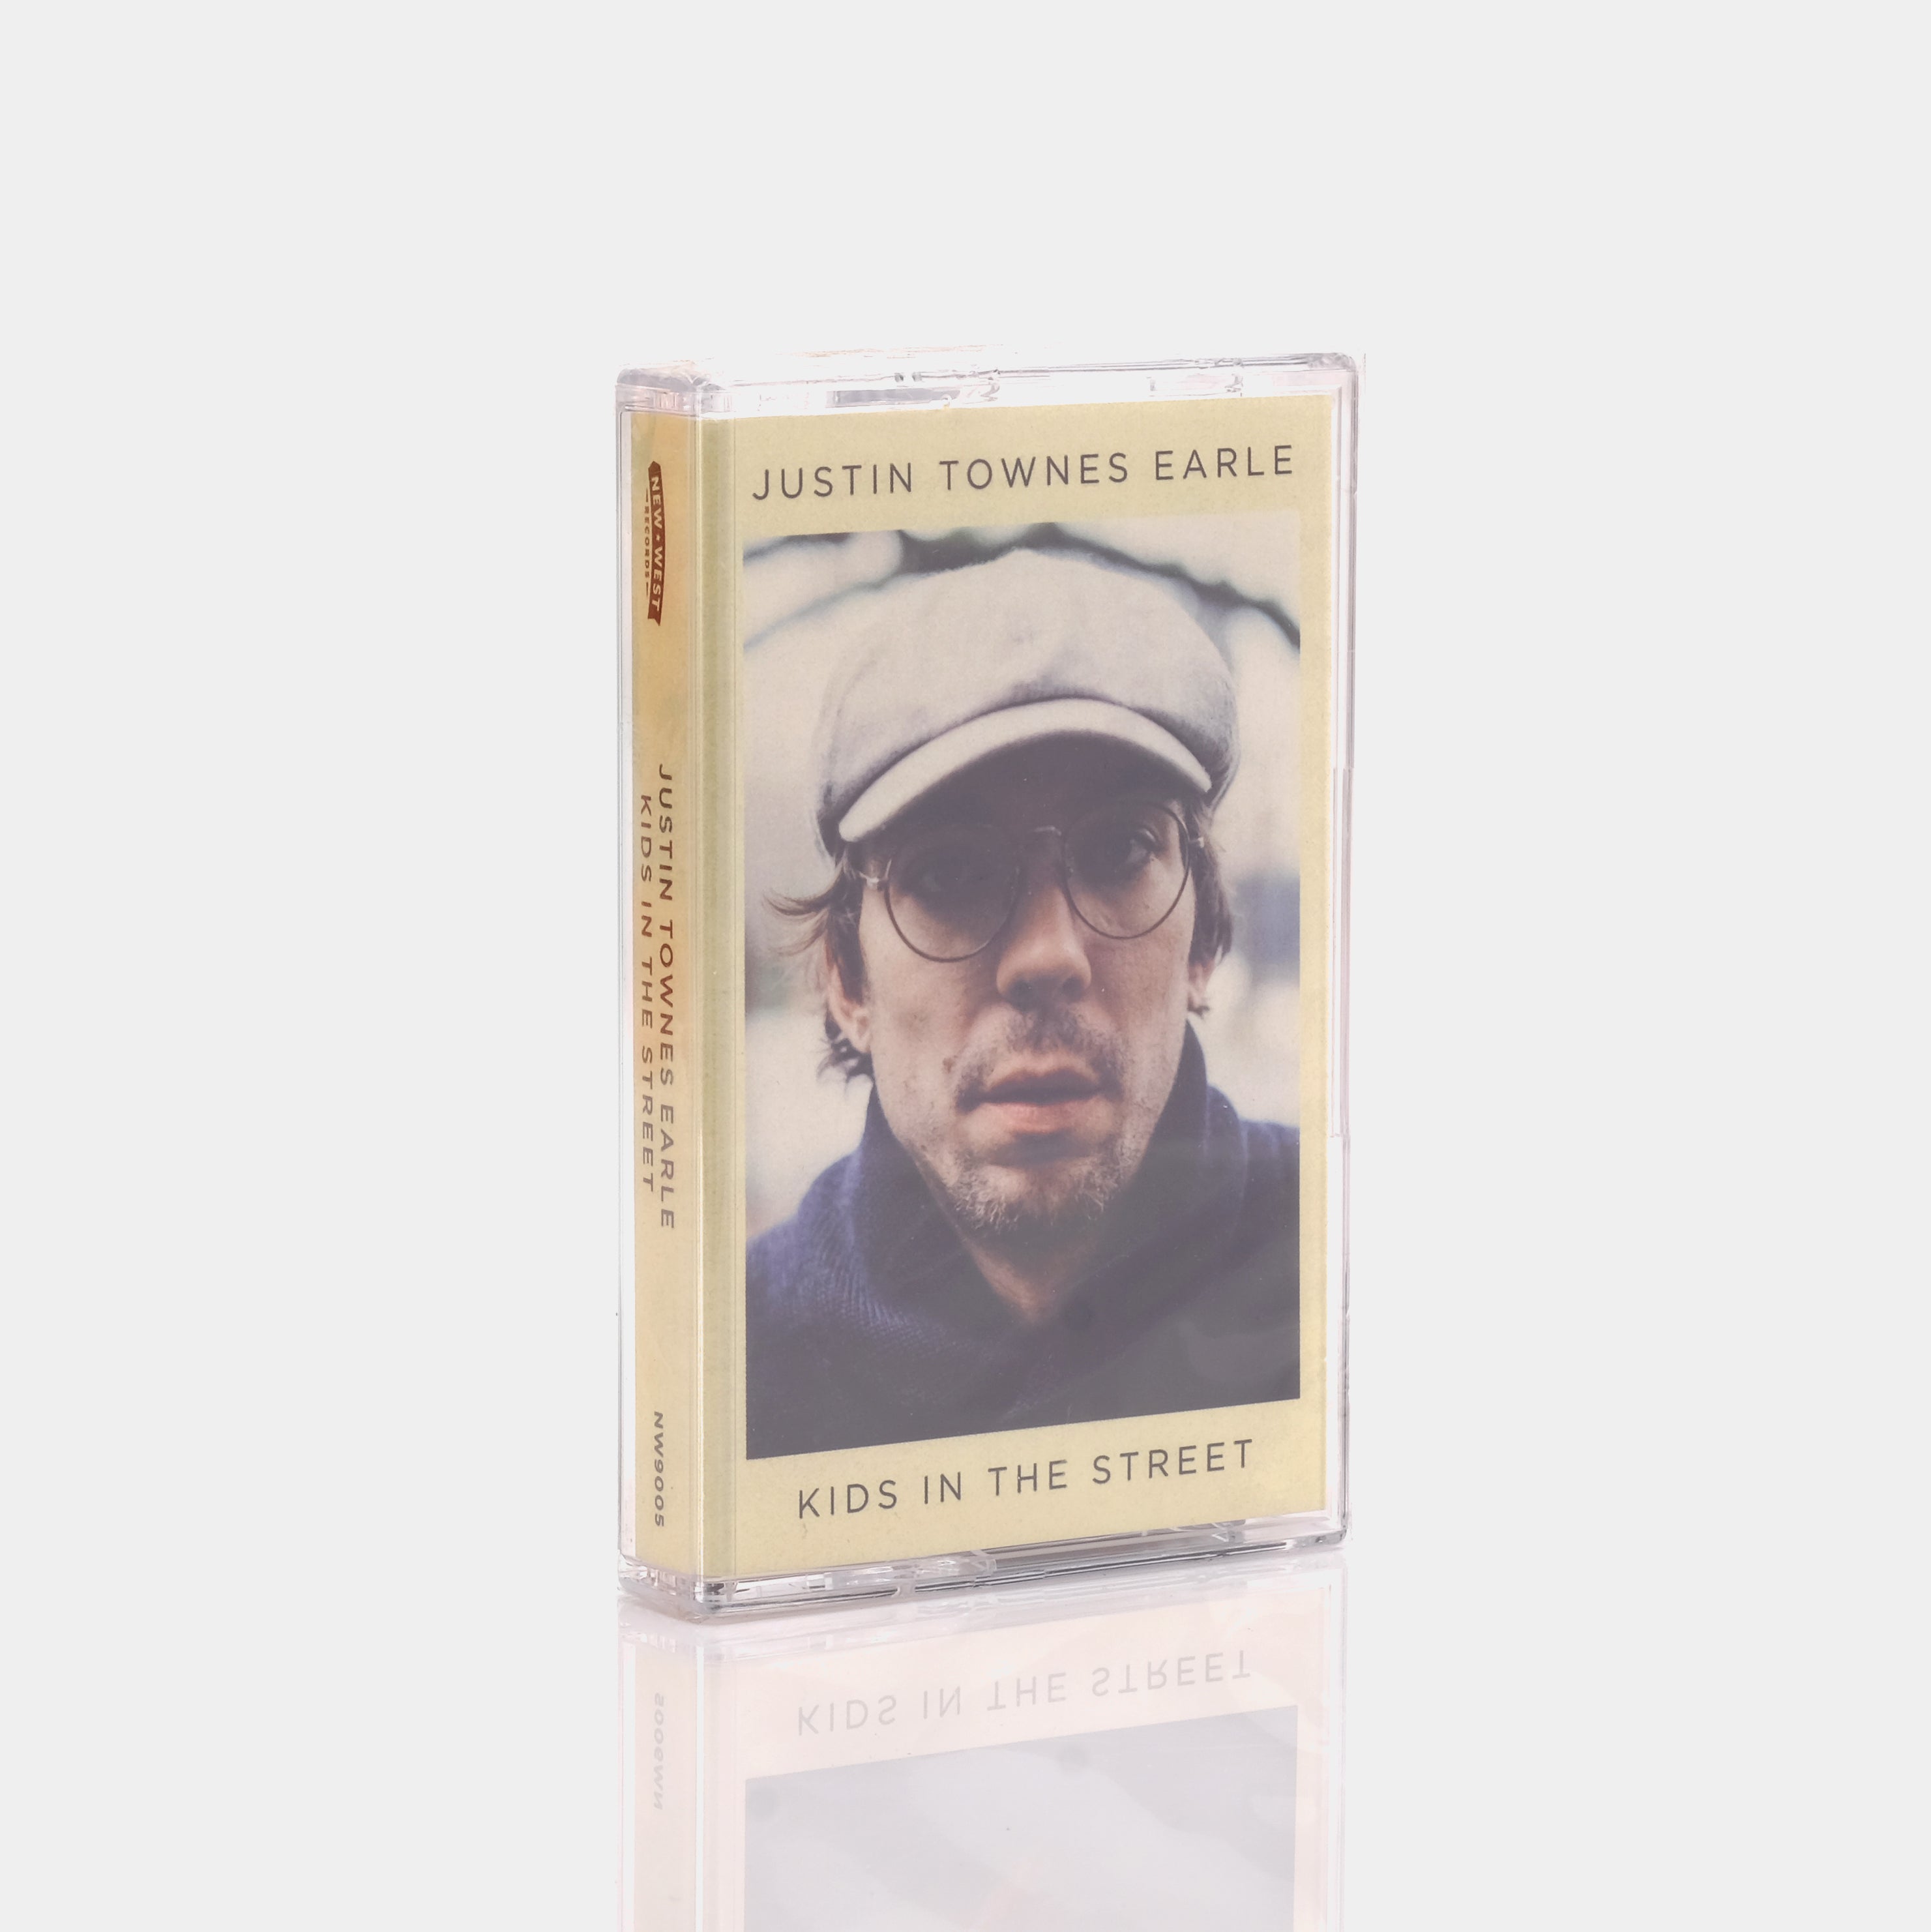 Justin Townes Earle - Kids In The Street Cassette Tape